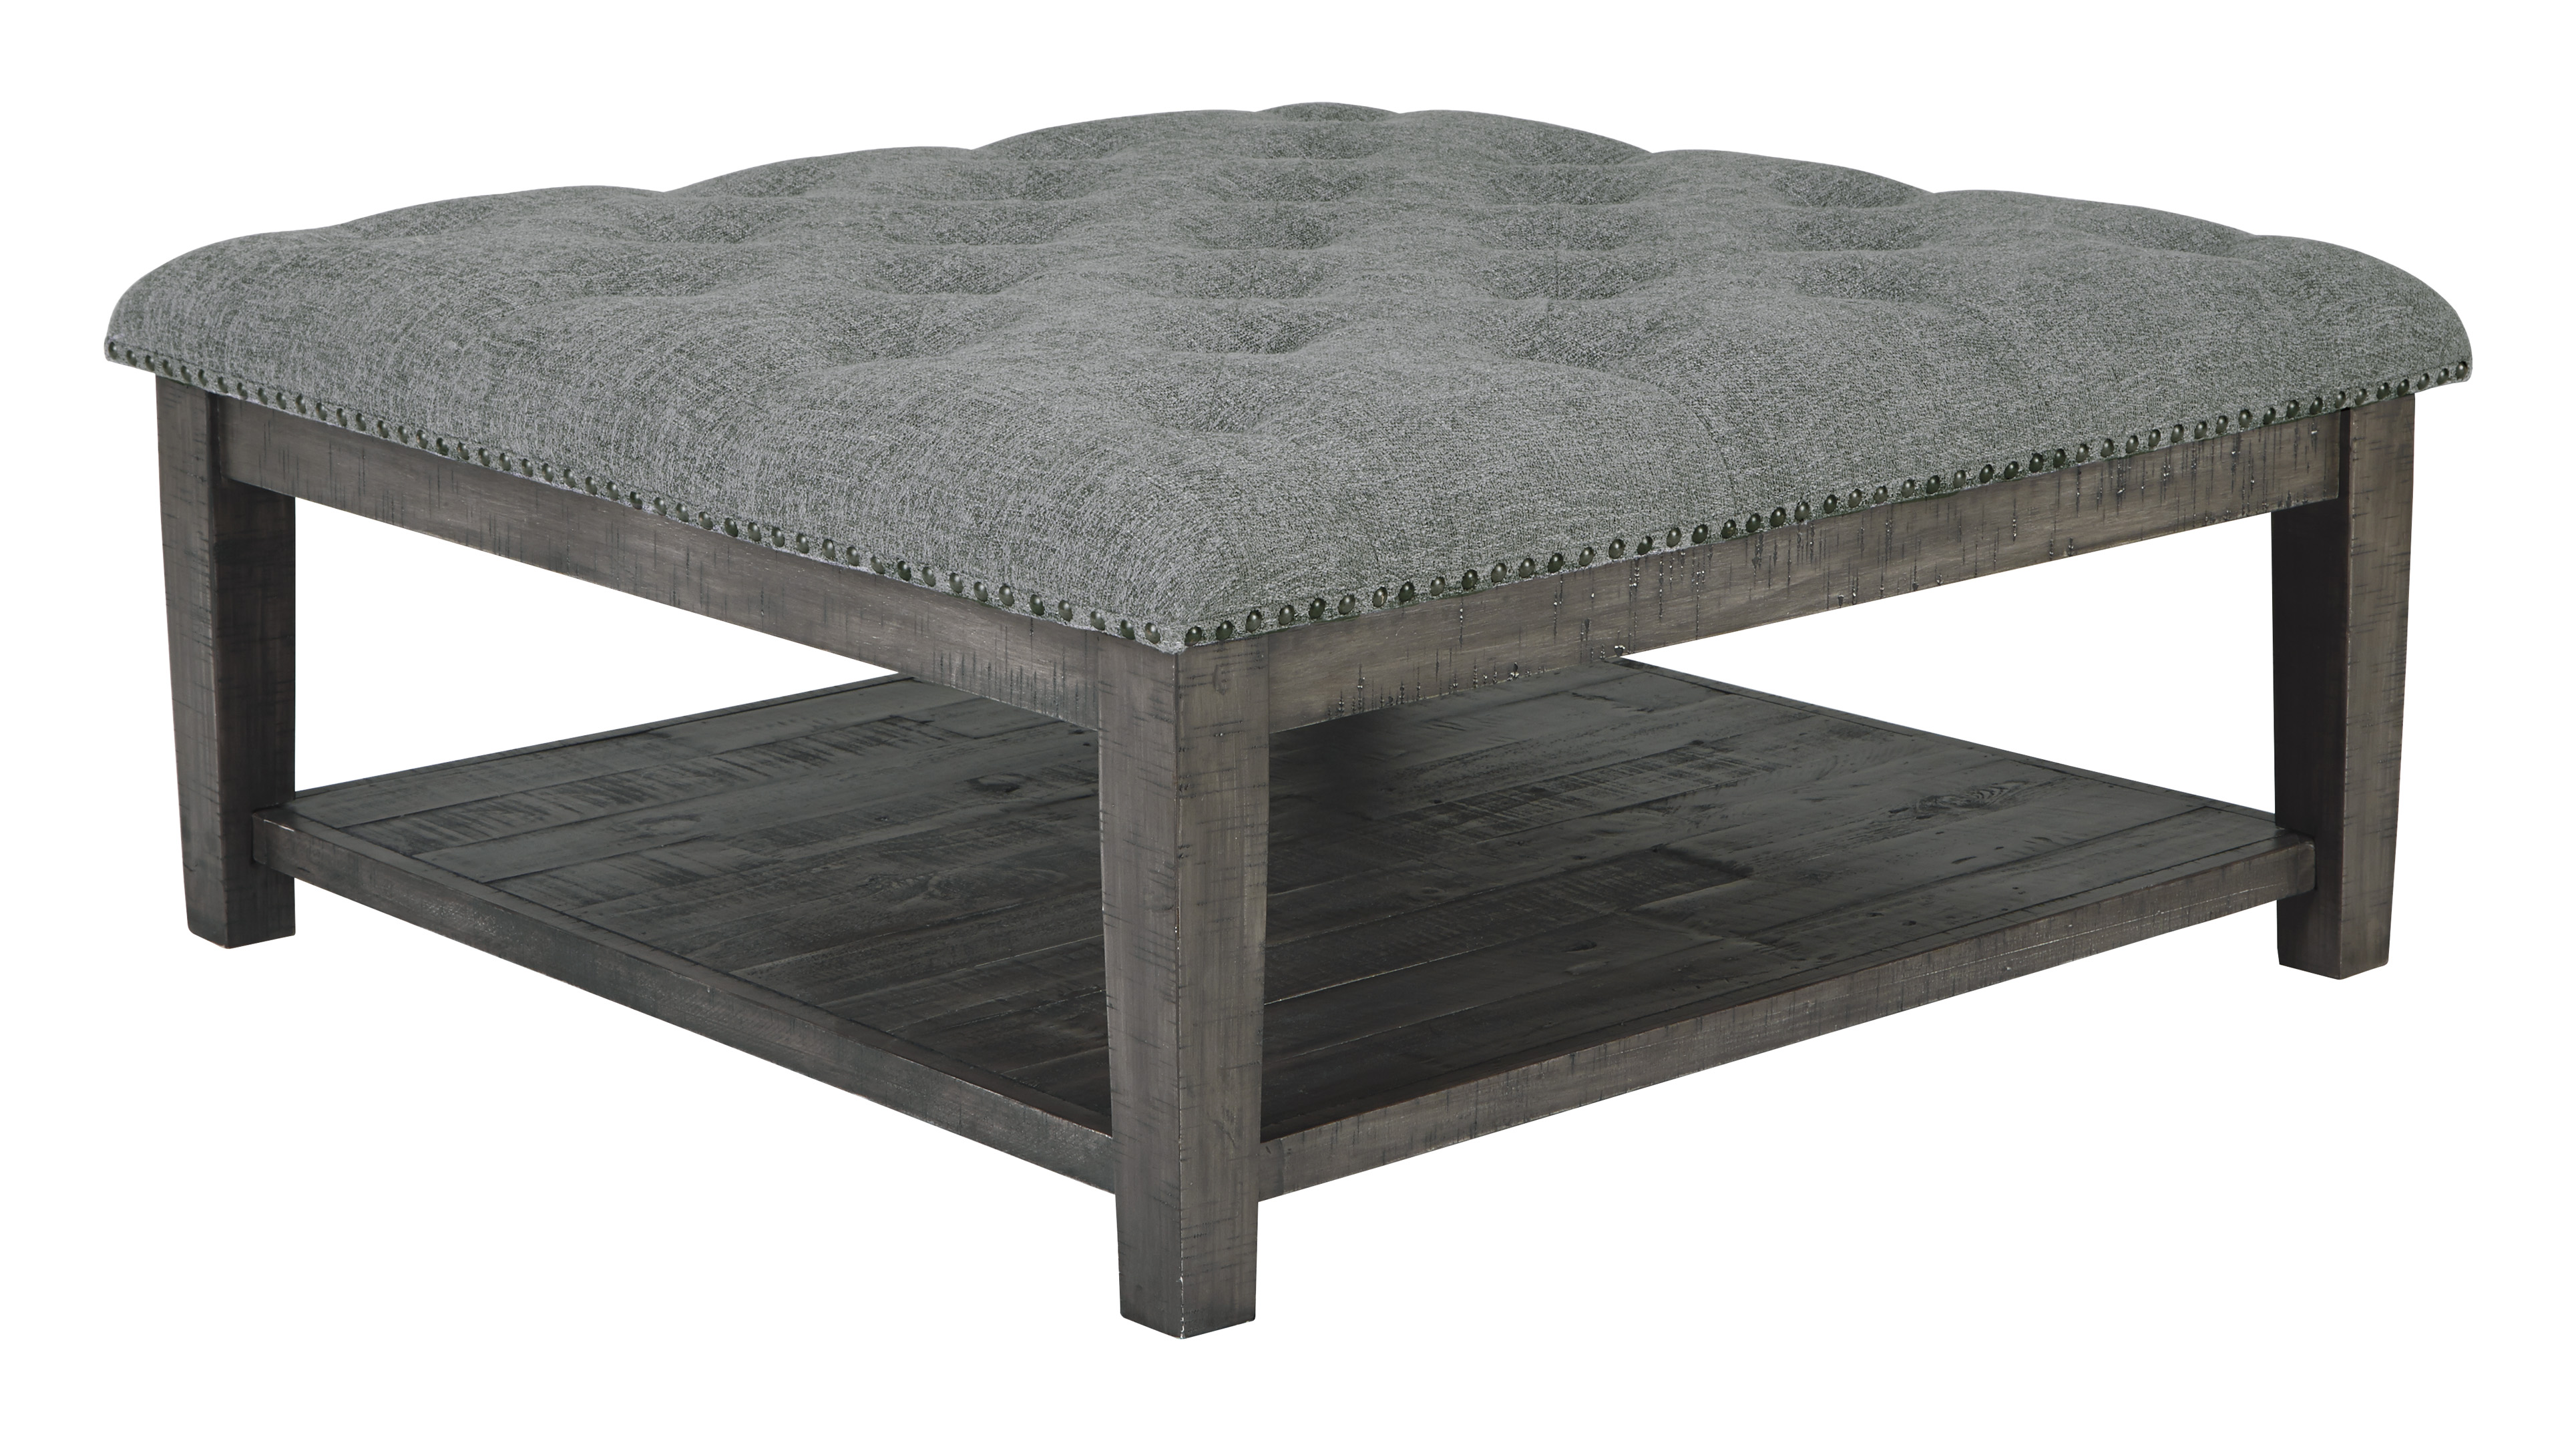 October Square Ottoman-Style Coffee Table with Storage